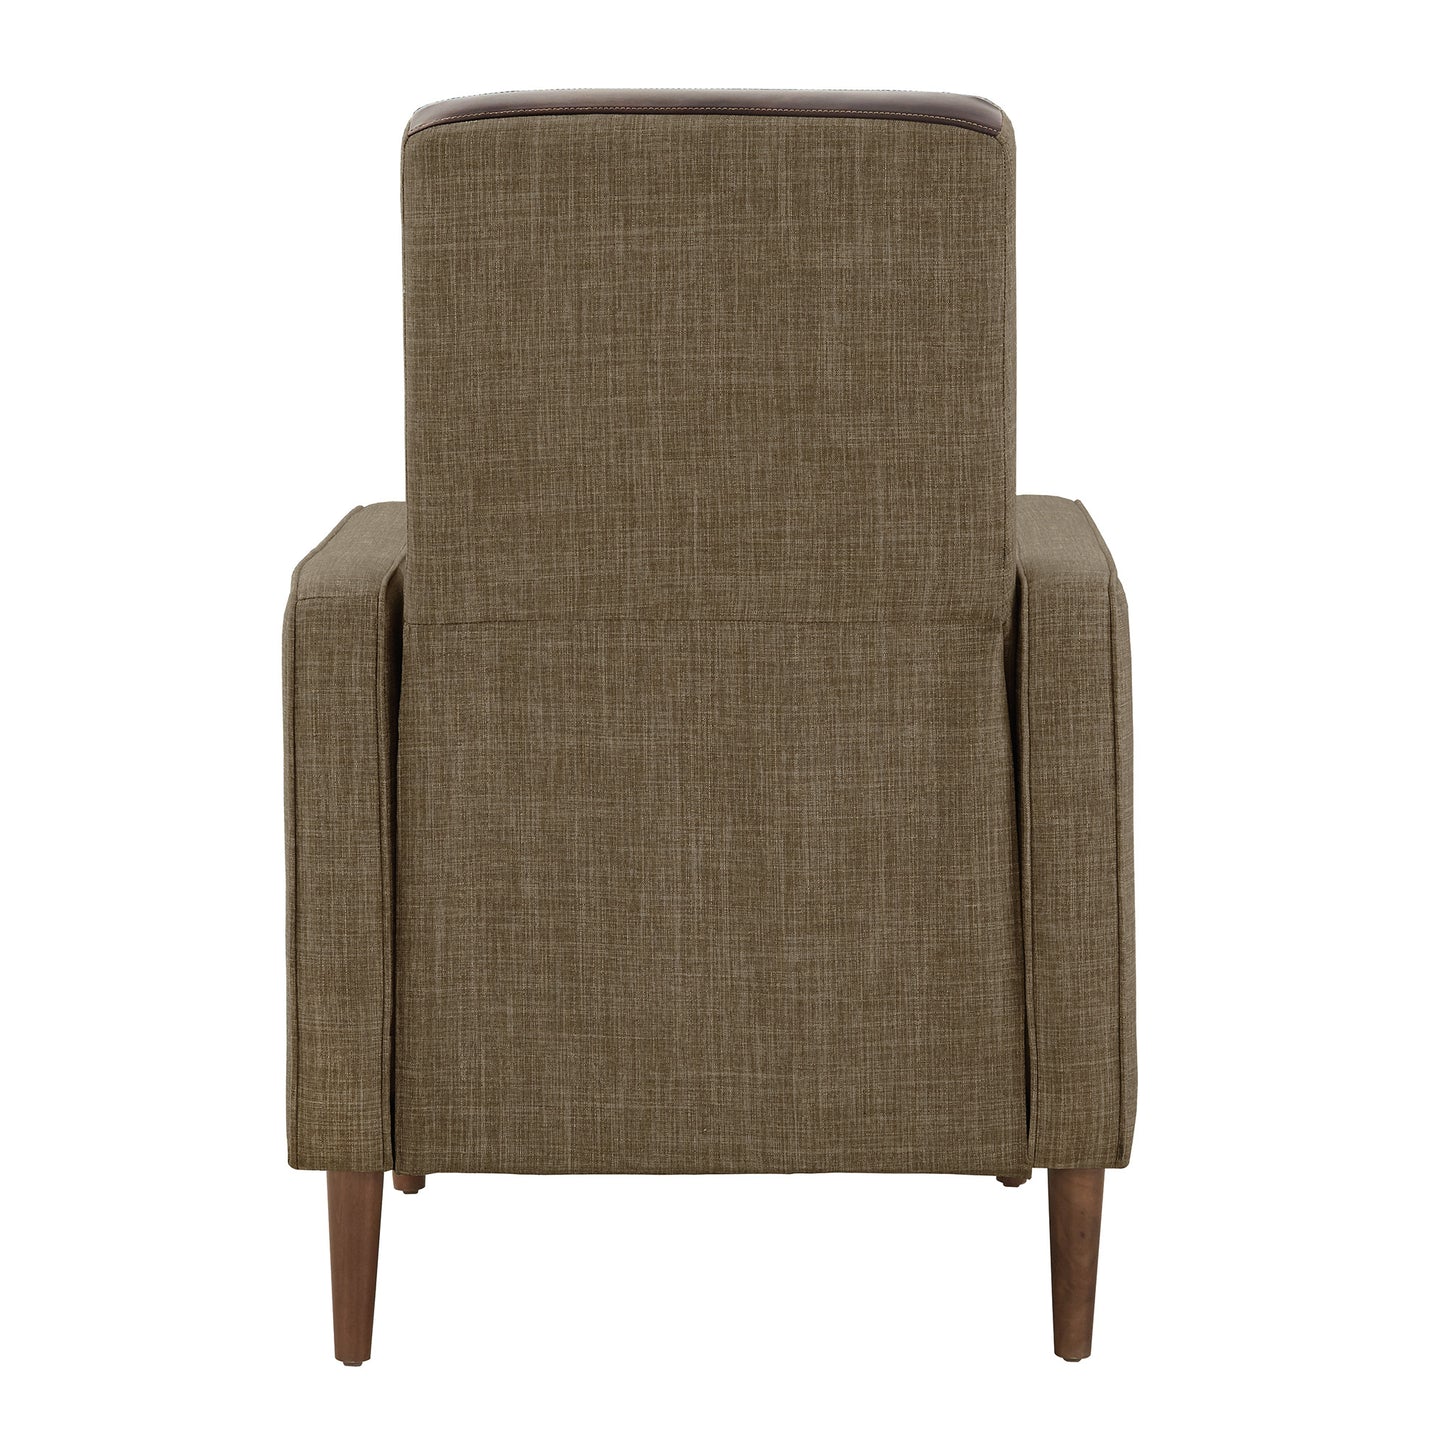 Push-Back Recliner - Brown with Light Brown Linen